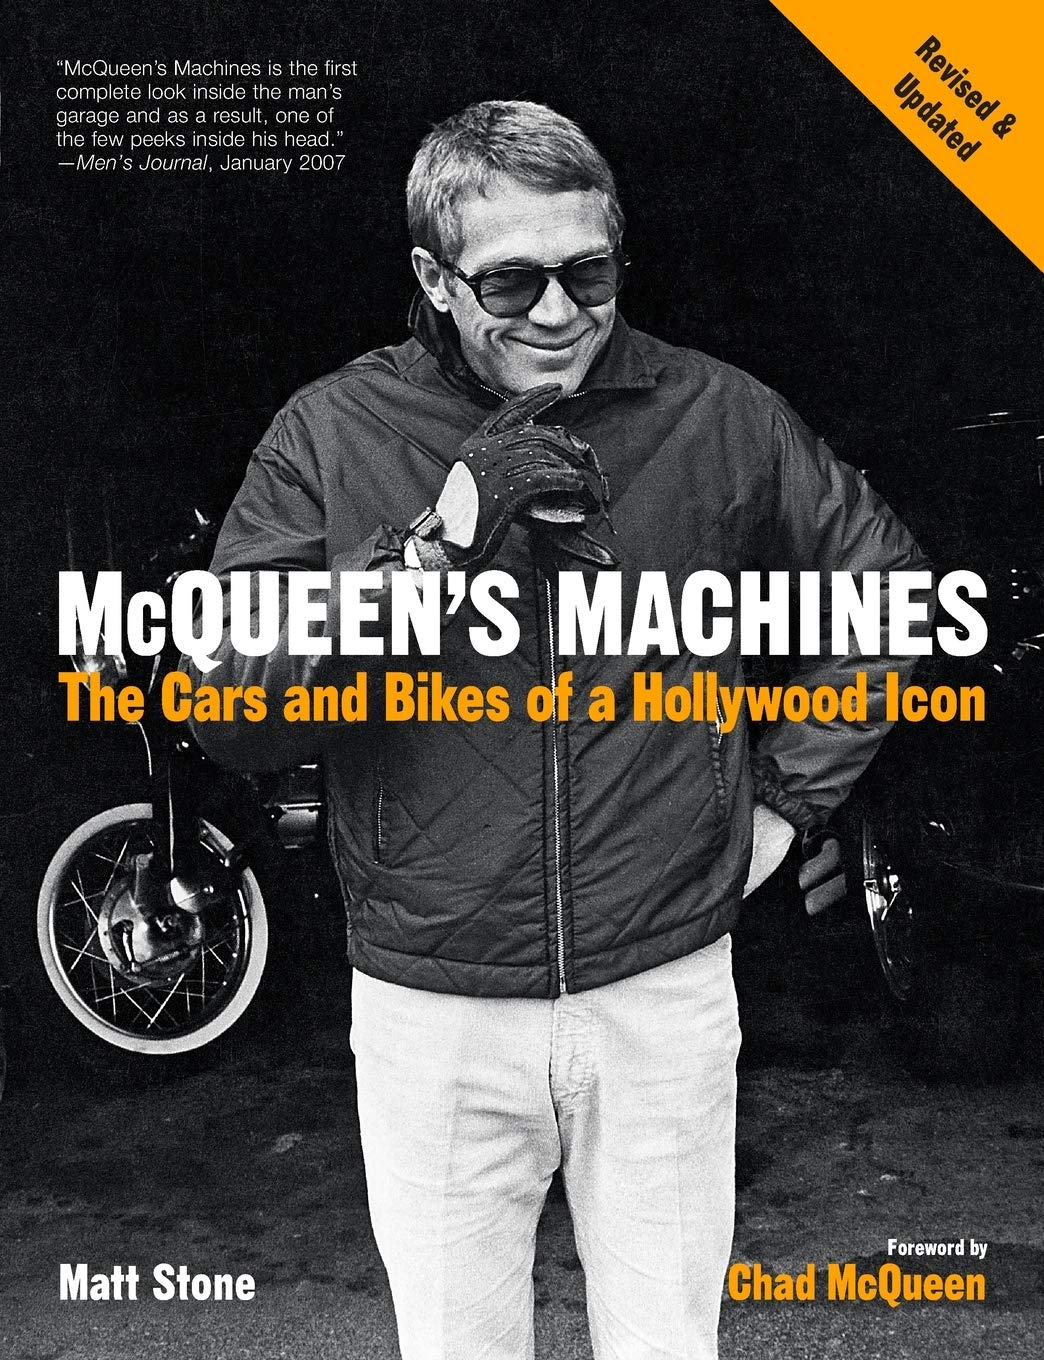 McQueen's Machines: The Cars and Bikes of a Hollywood Icon